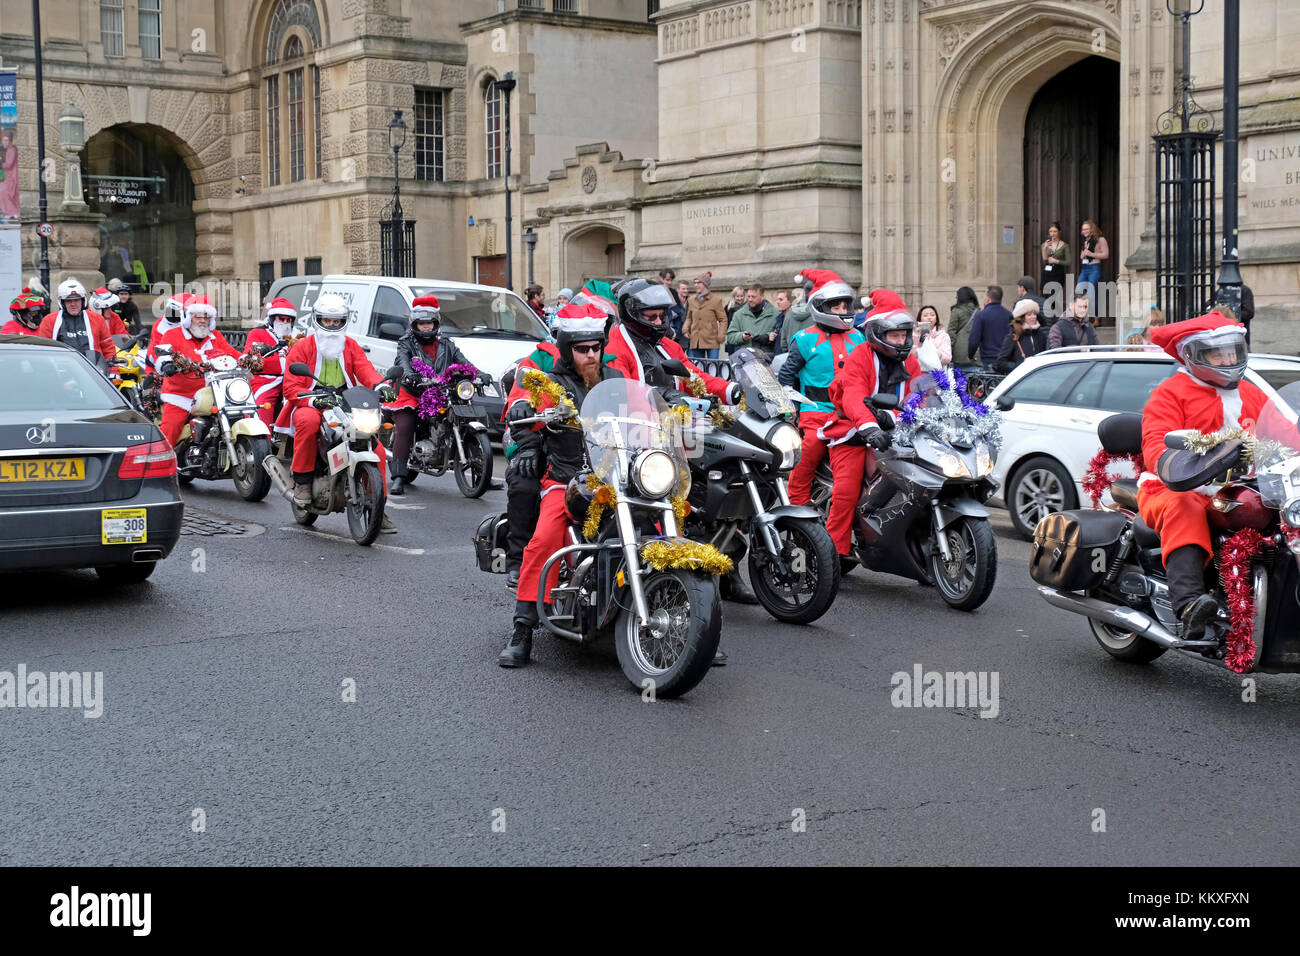 Bristol, UK. 2nd December, 2017. Motorcyclists dressed as Santa Claus ride through the city centre. The riders aimed to raise £10,000 for Children’s Hospice South West’s facility at Charlton Farm in Wraxall, Somerset, a few miles to the south of Bristol. Keith Ramsey/Alamy Live News Stock Photo